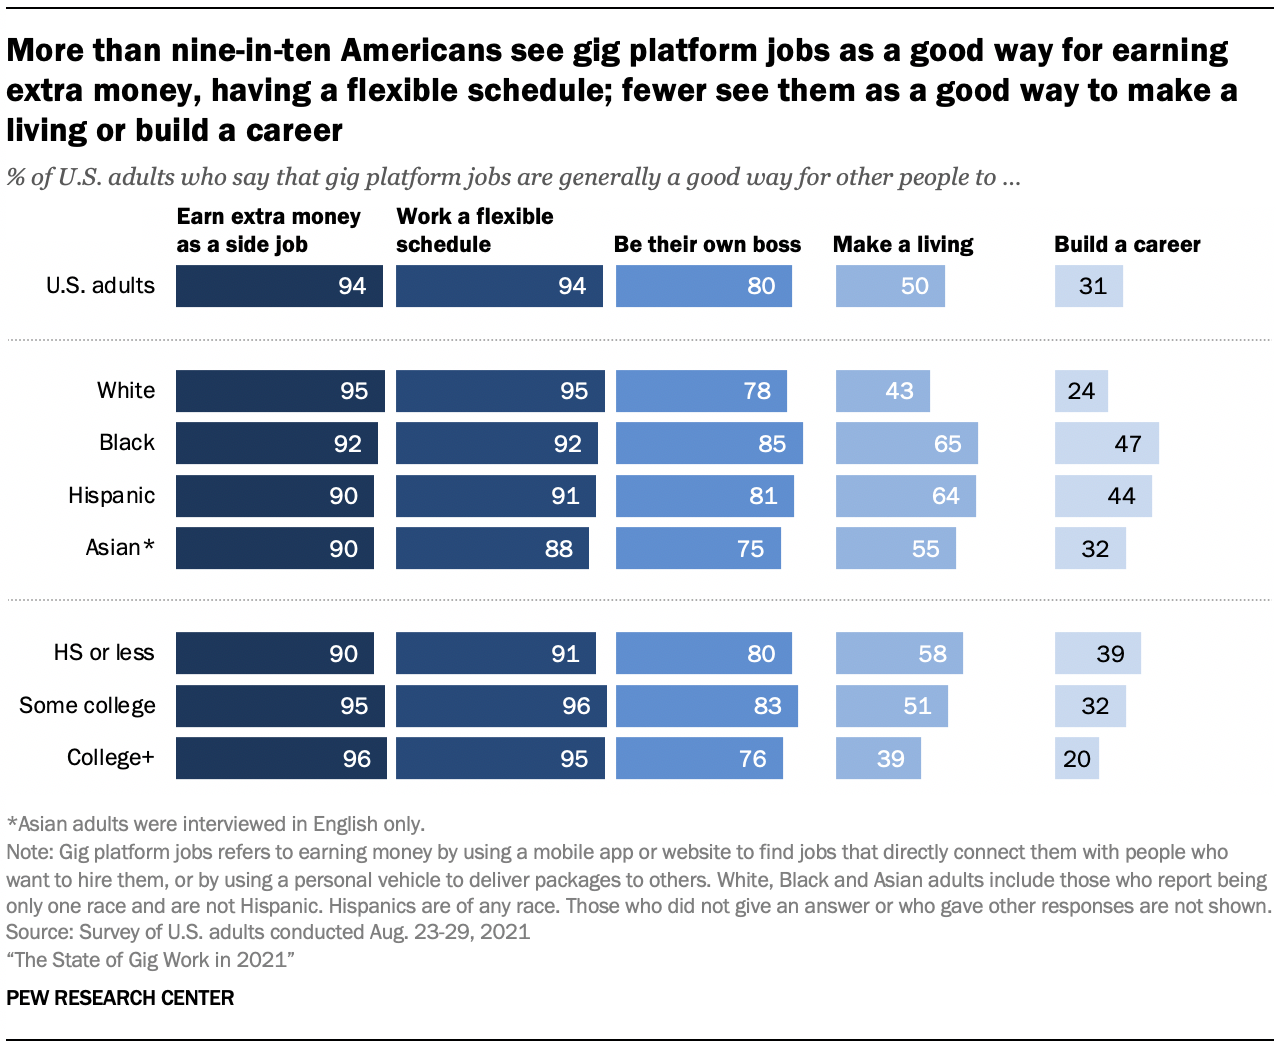 More than nine-in-ten Americans see gig platform jobs as a good way for earning extra money, having a flexible schedule; fewer see them as a good way to make a living or build a career